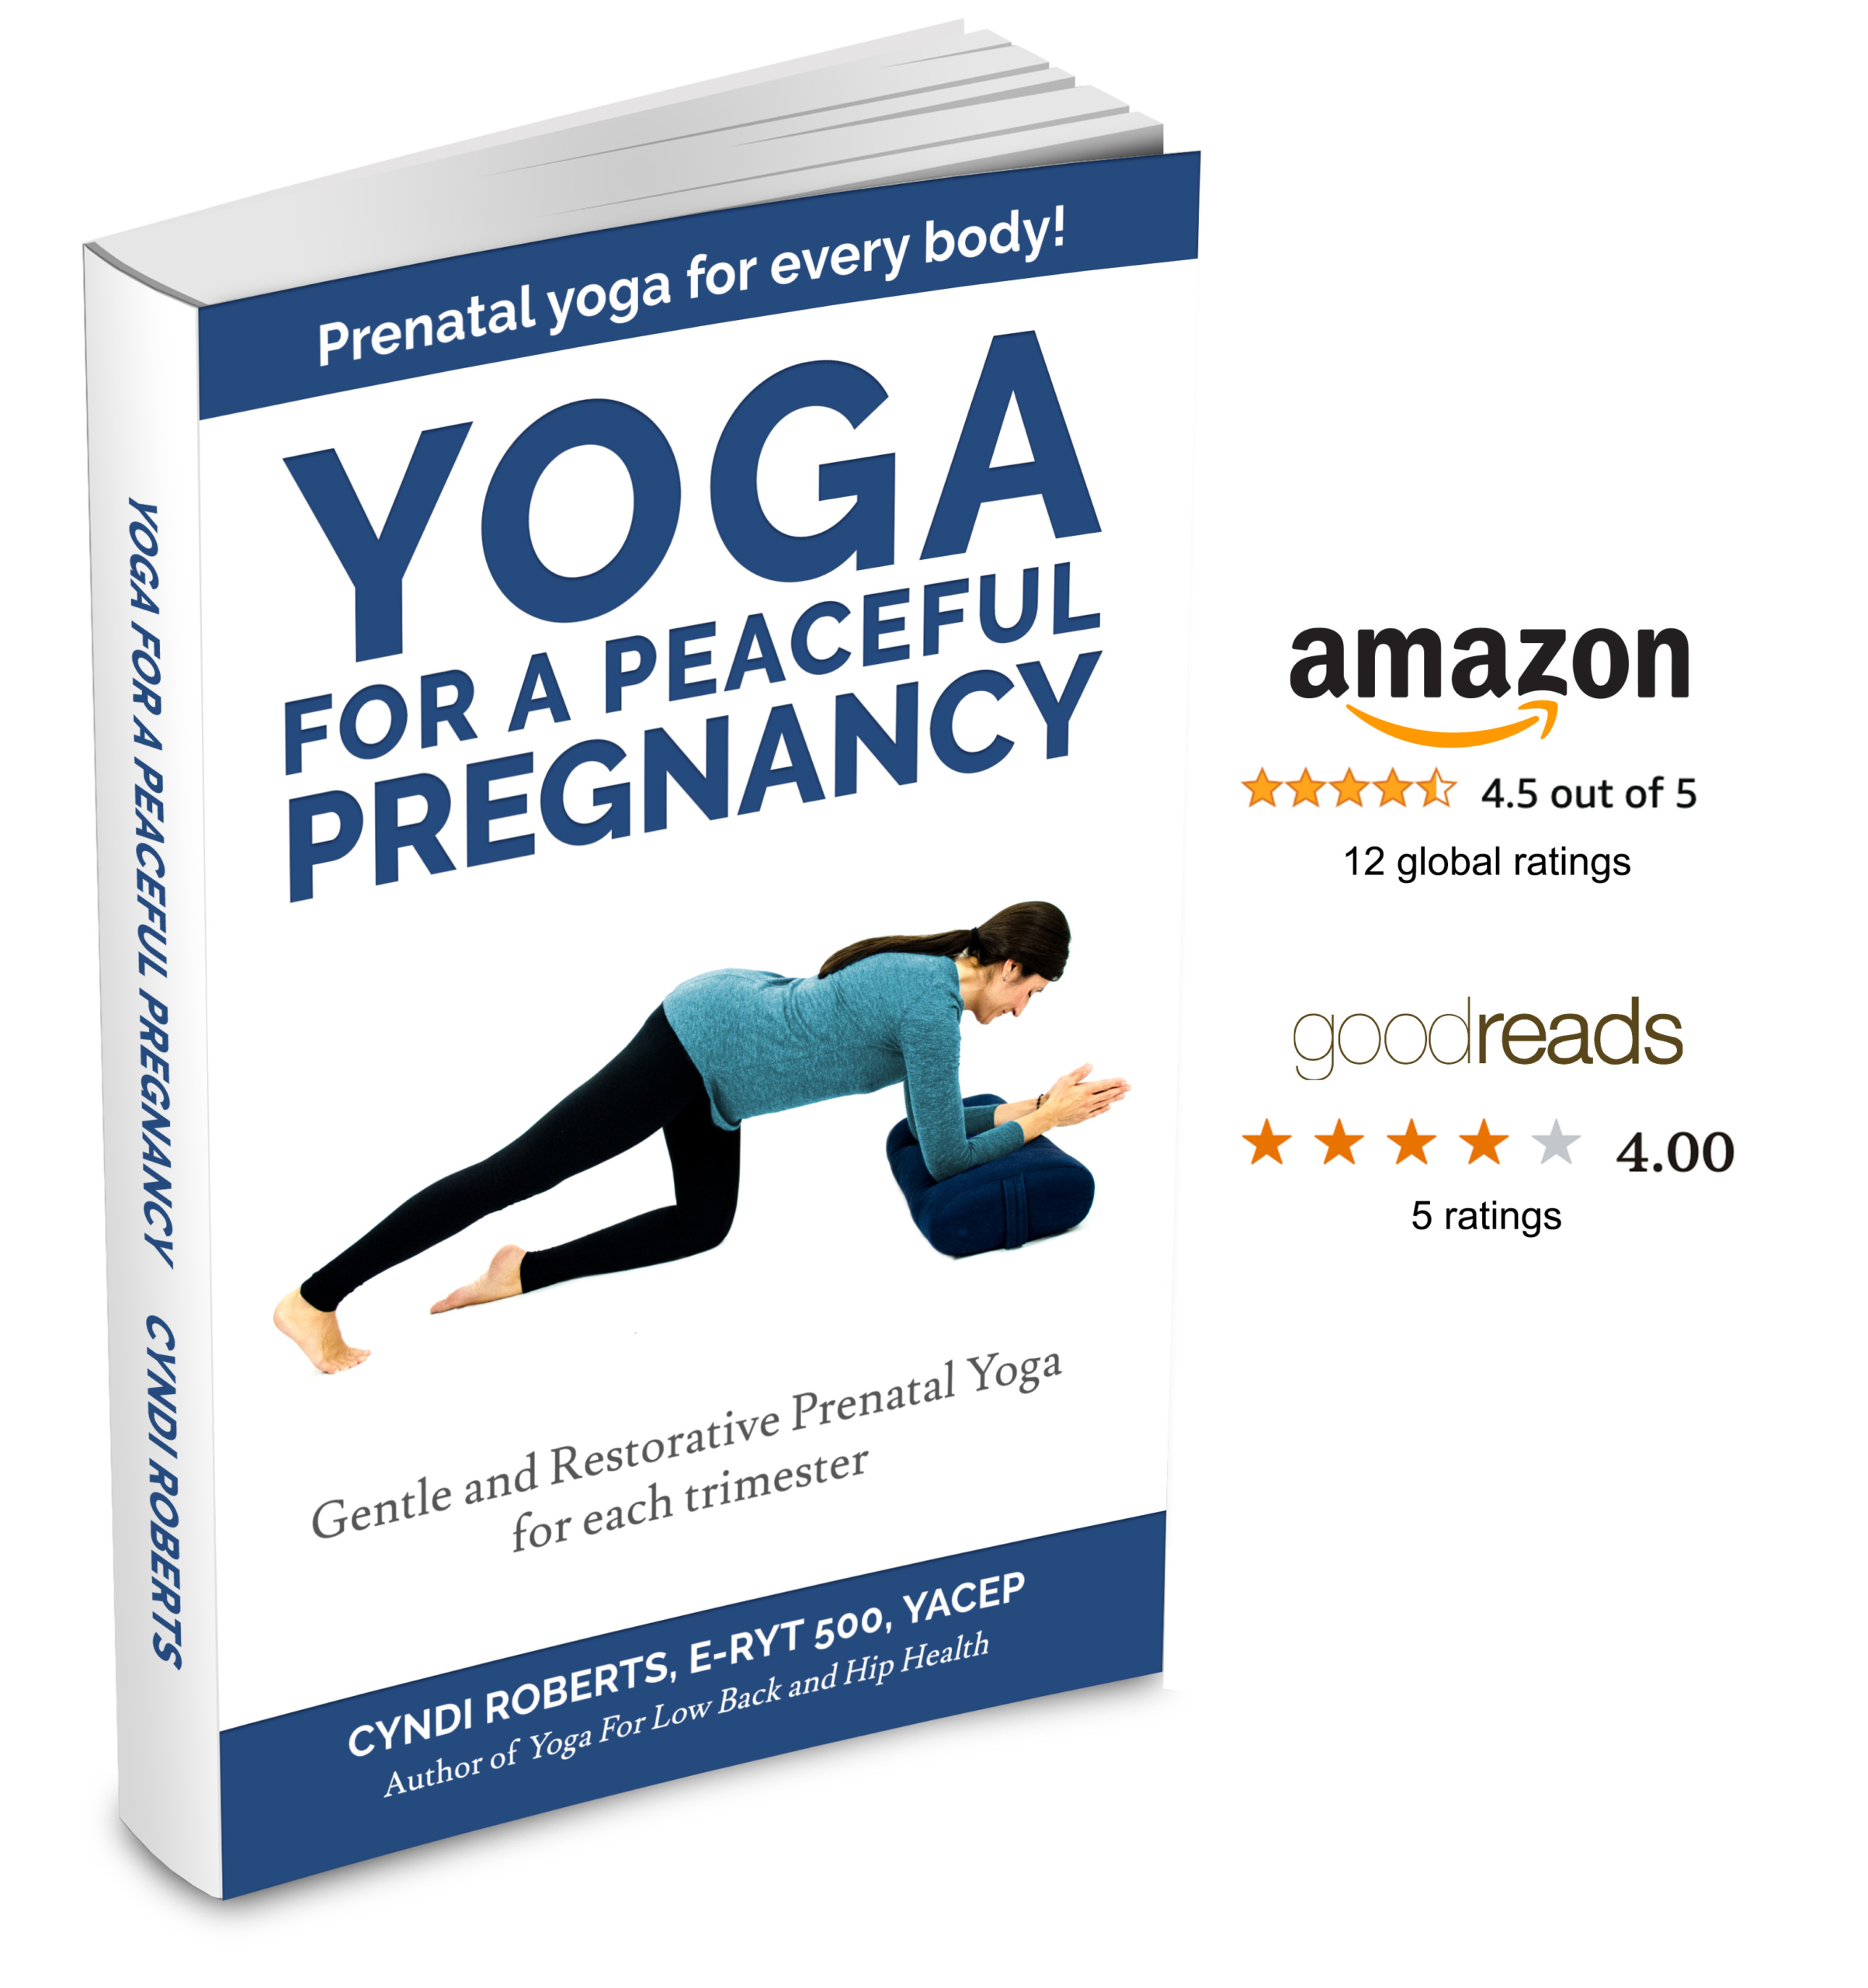 Yoga for a Peaceful Pregnancy reviews - instructional yoga book by Cyndi Roberts